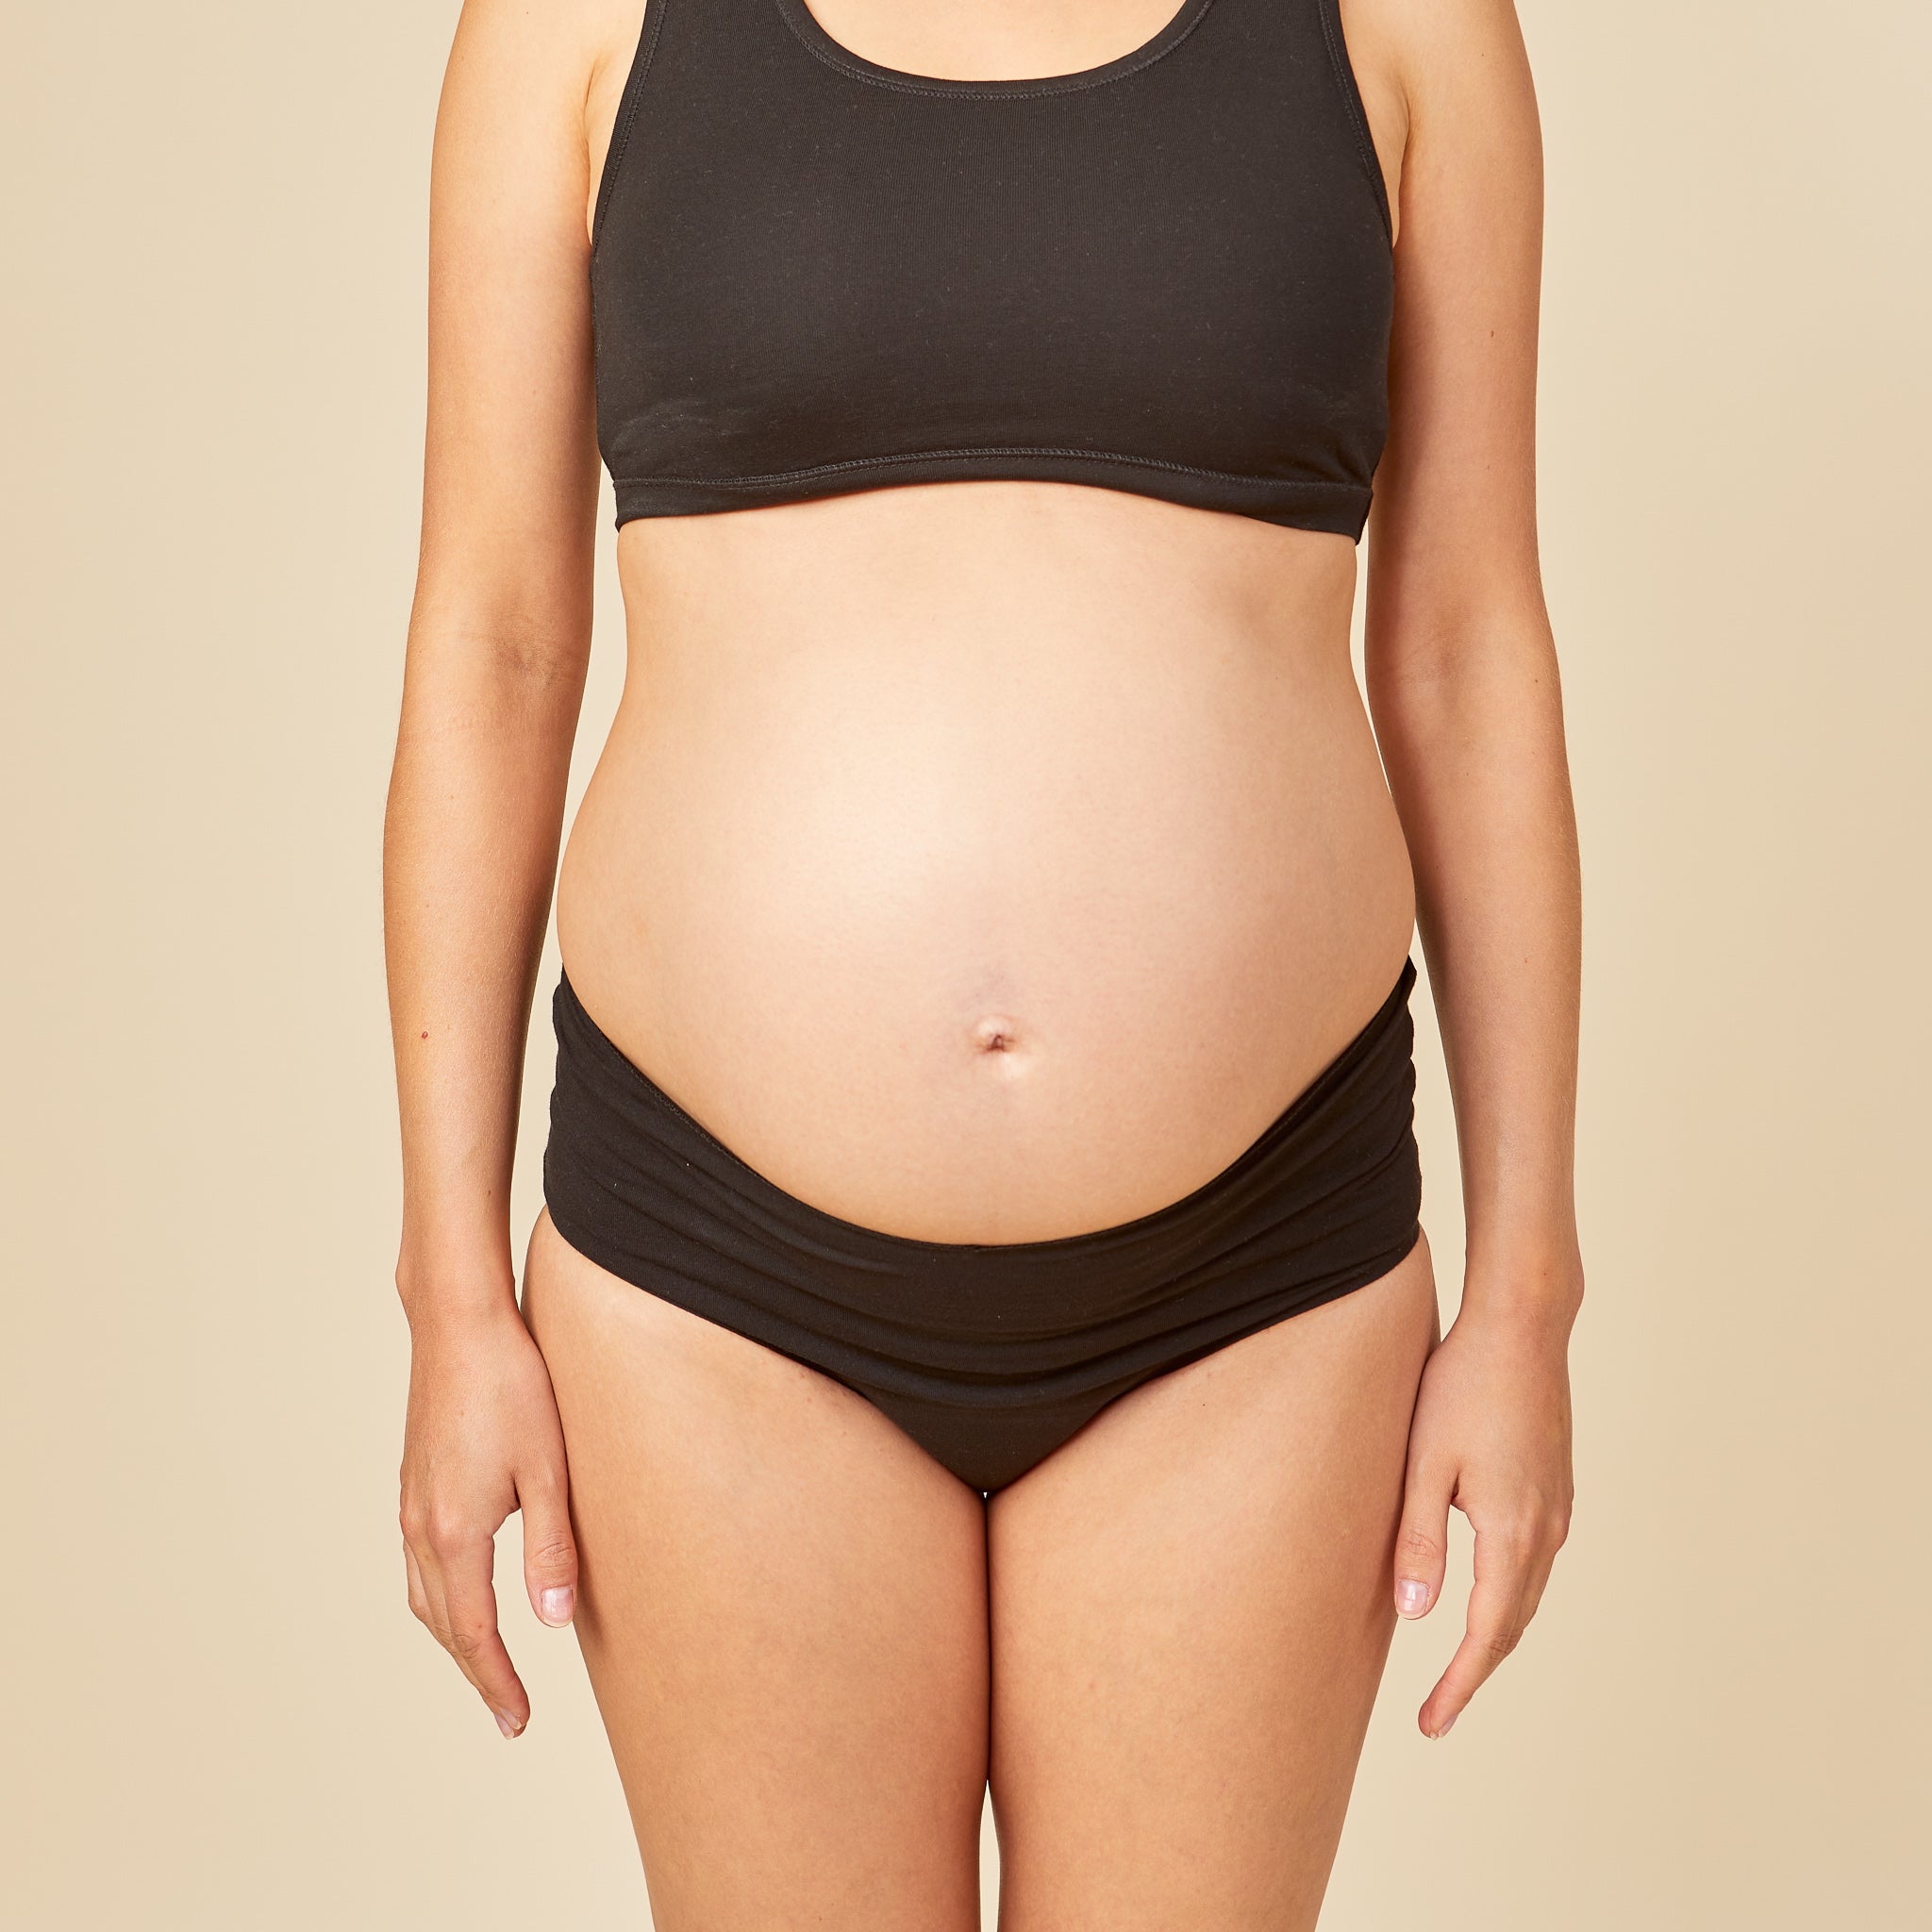 dais maternity absorbent underwear in high waist cut in black. Shown on pregnant model from the front.